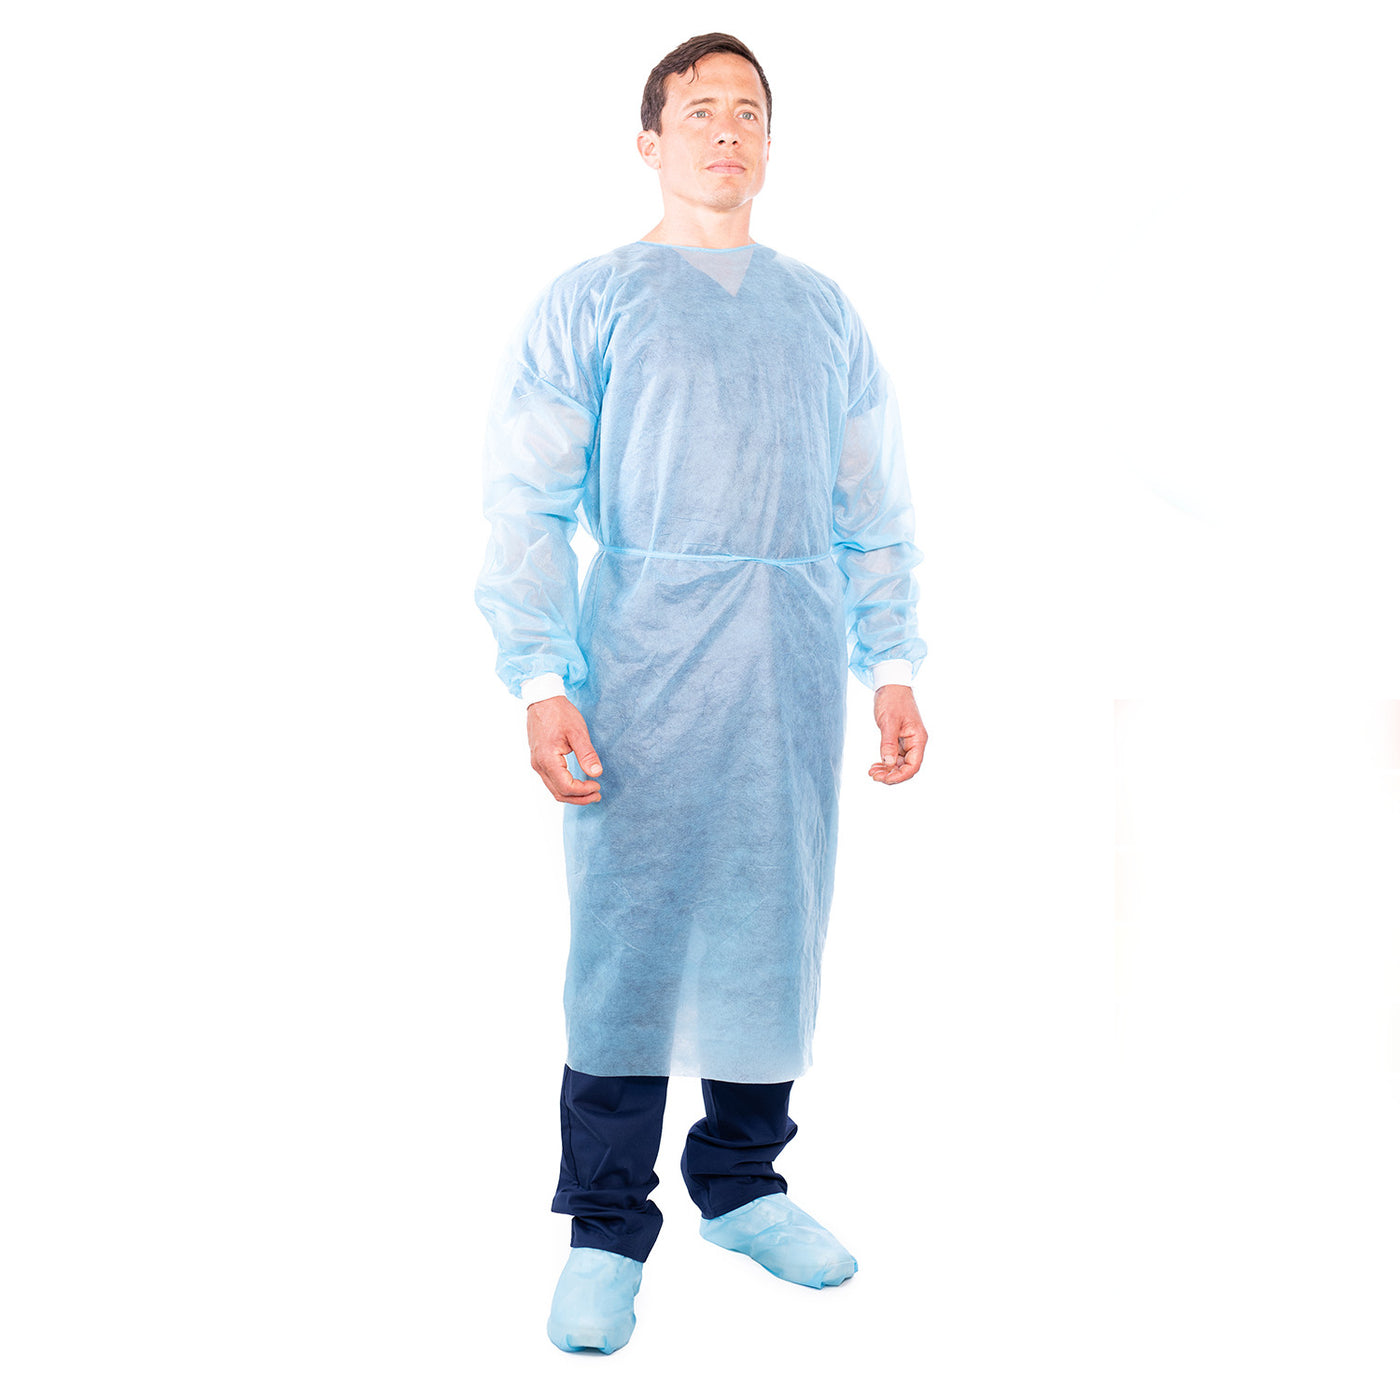 Reusable Level 1 Isolation Gown by CareAline - Powered by Milliken  Perimeter Barrier Fabric